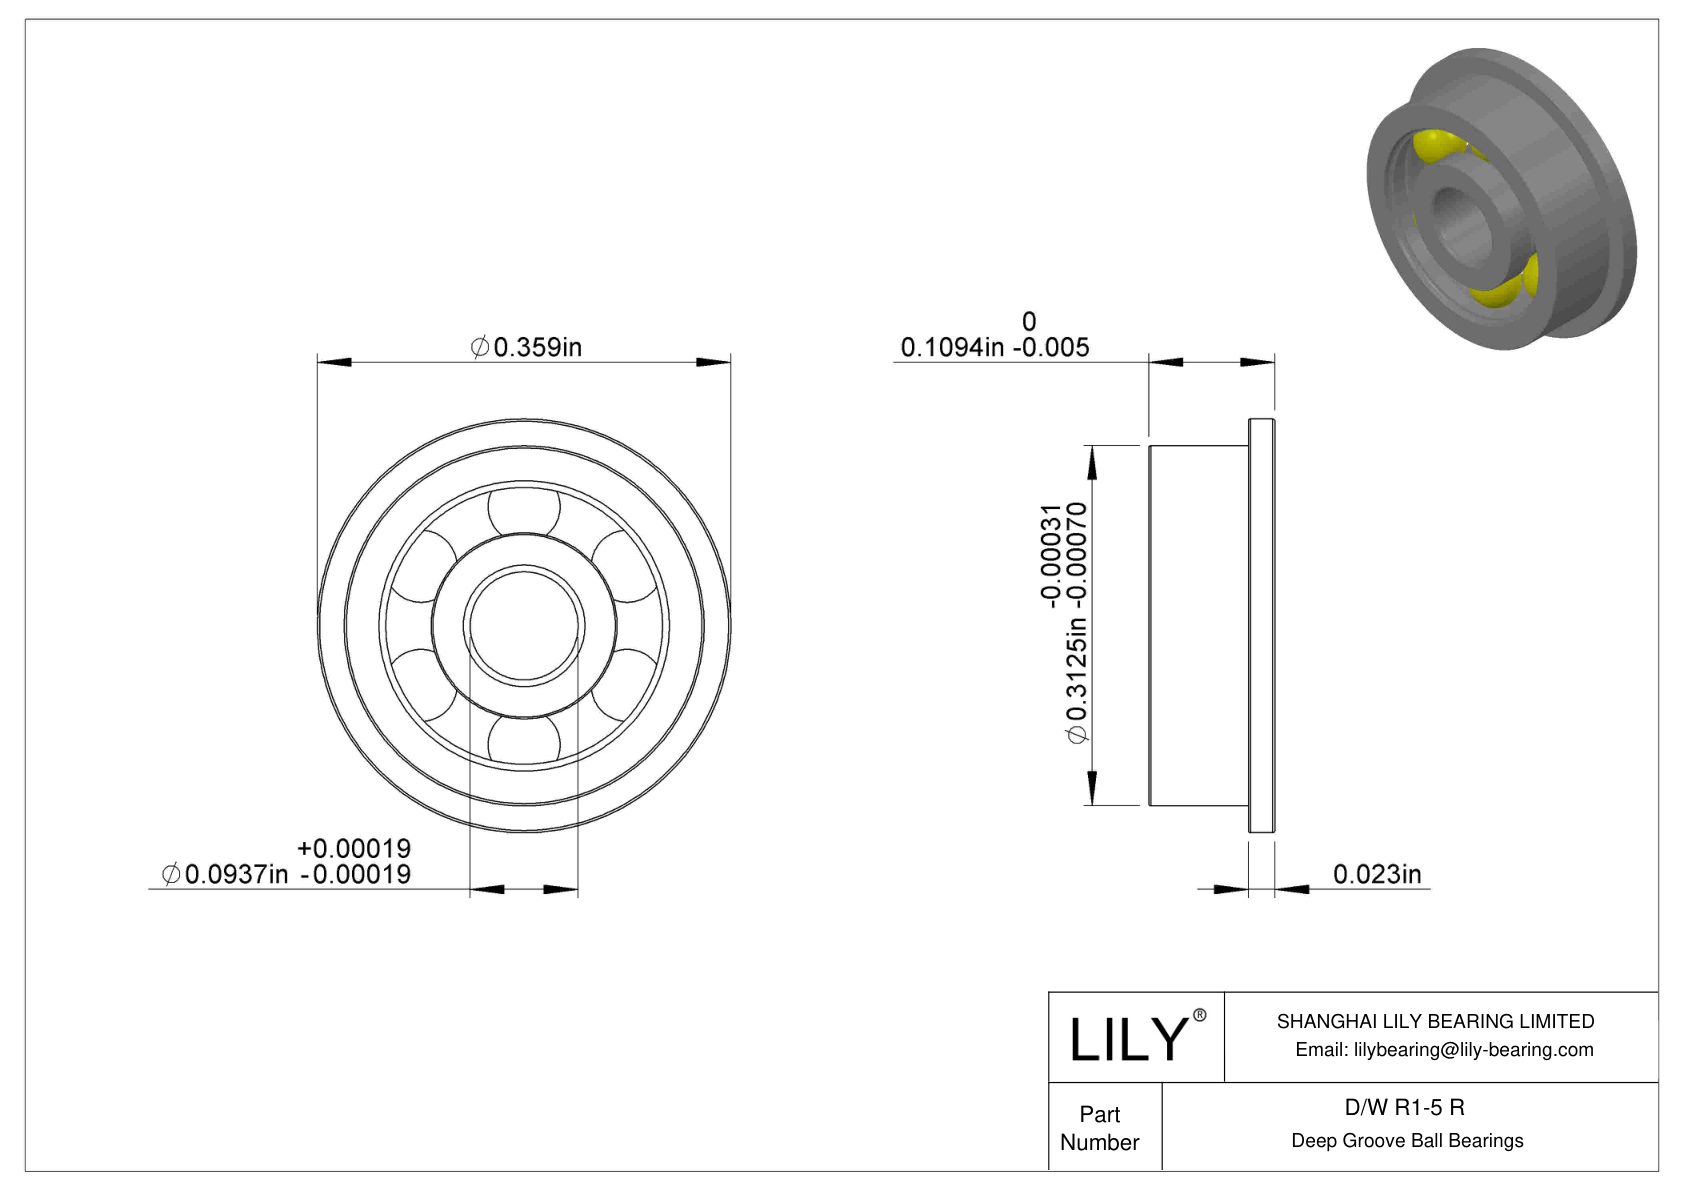 D/W R1-5 R Flanged Ball Bearings cad drawing